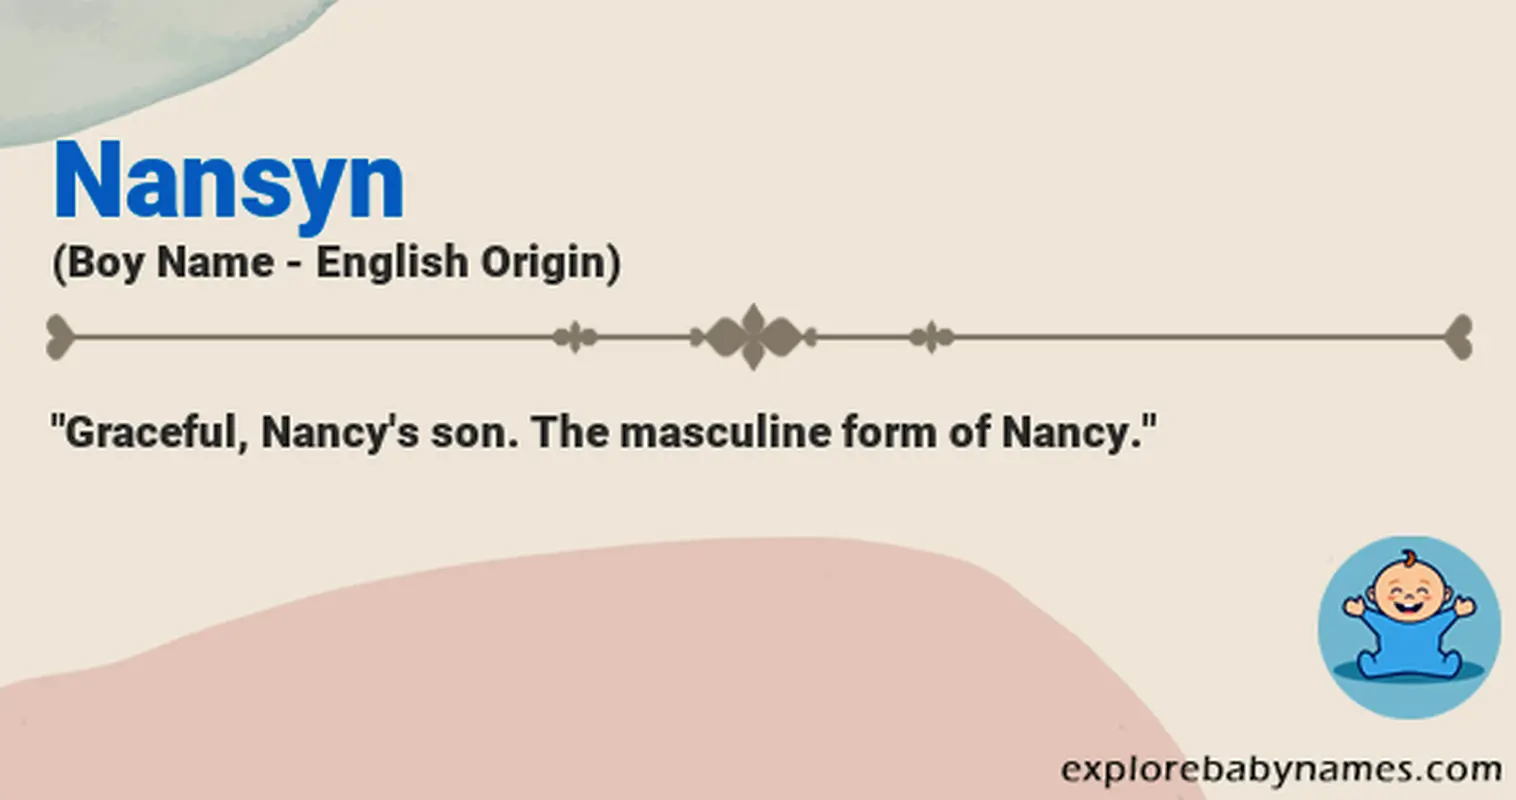 Meaning of Nansyn